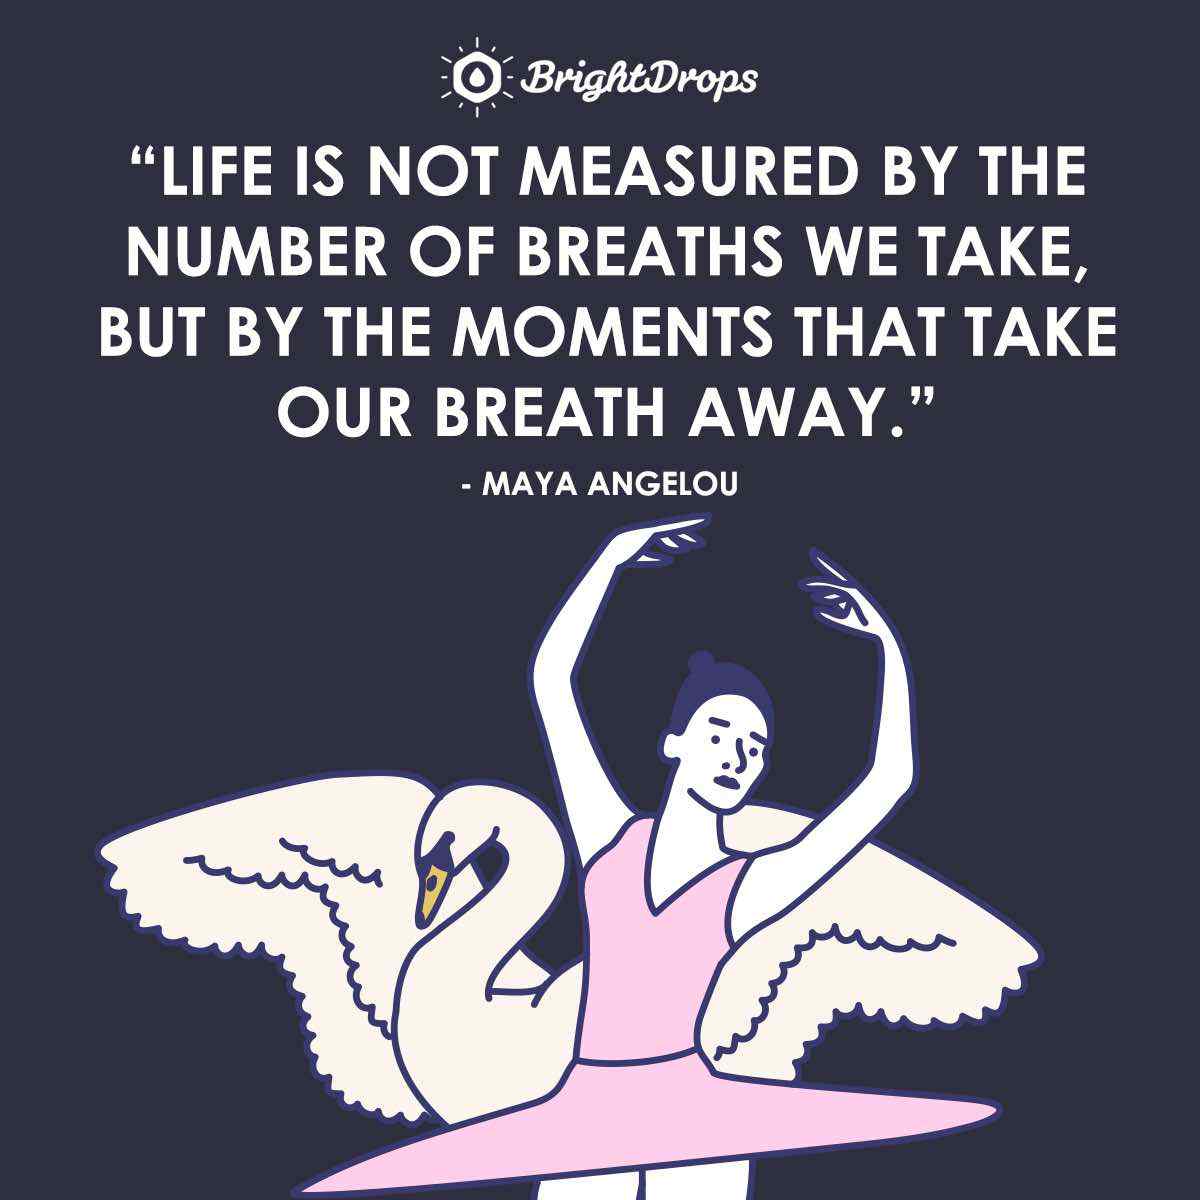 “Life is not measured by the number of breaths we take, but by the moments that take our breath away.” ~ Maya Angelou